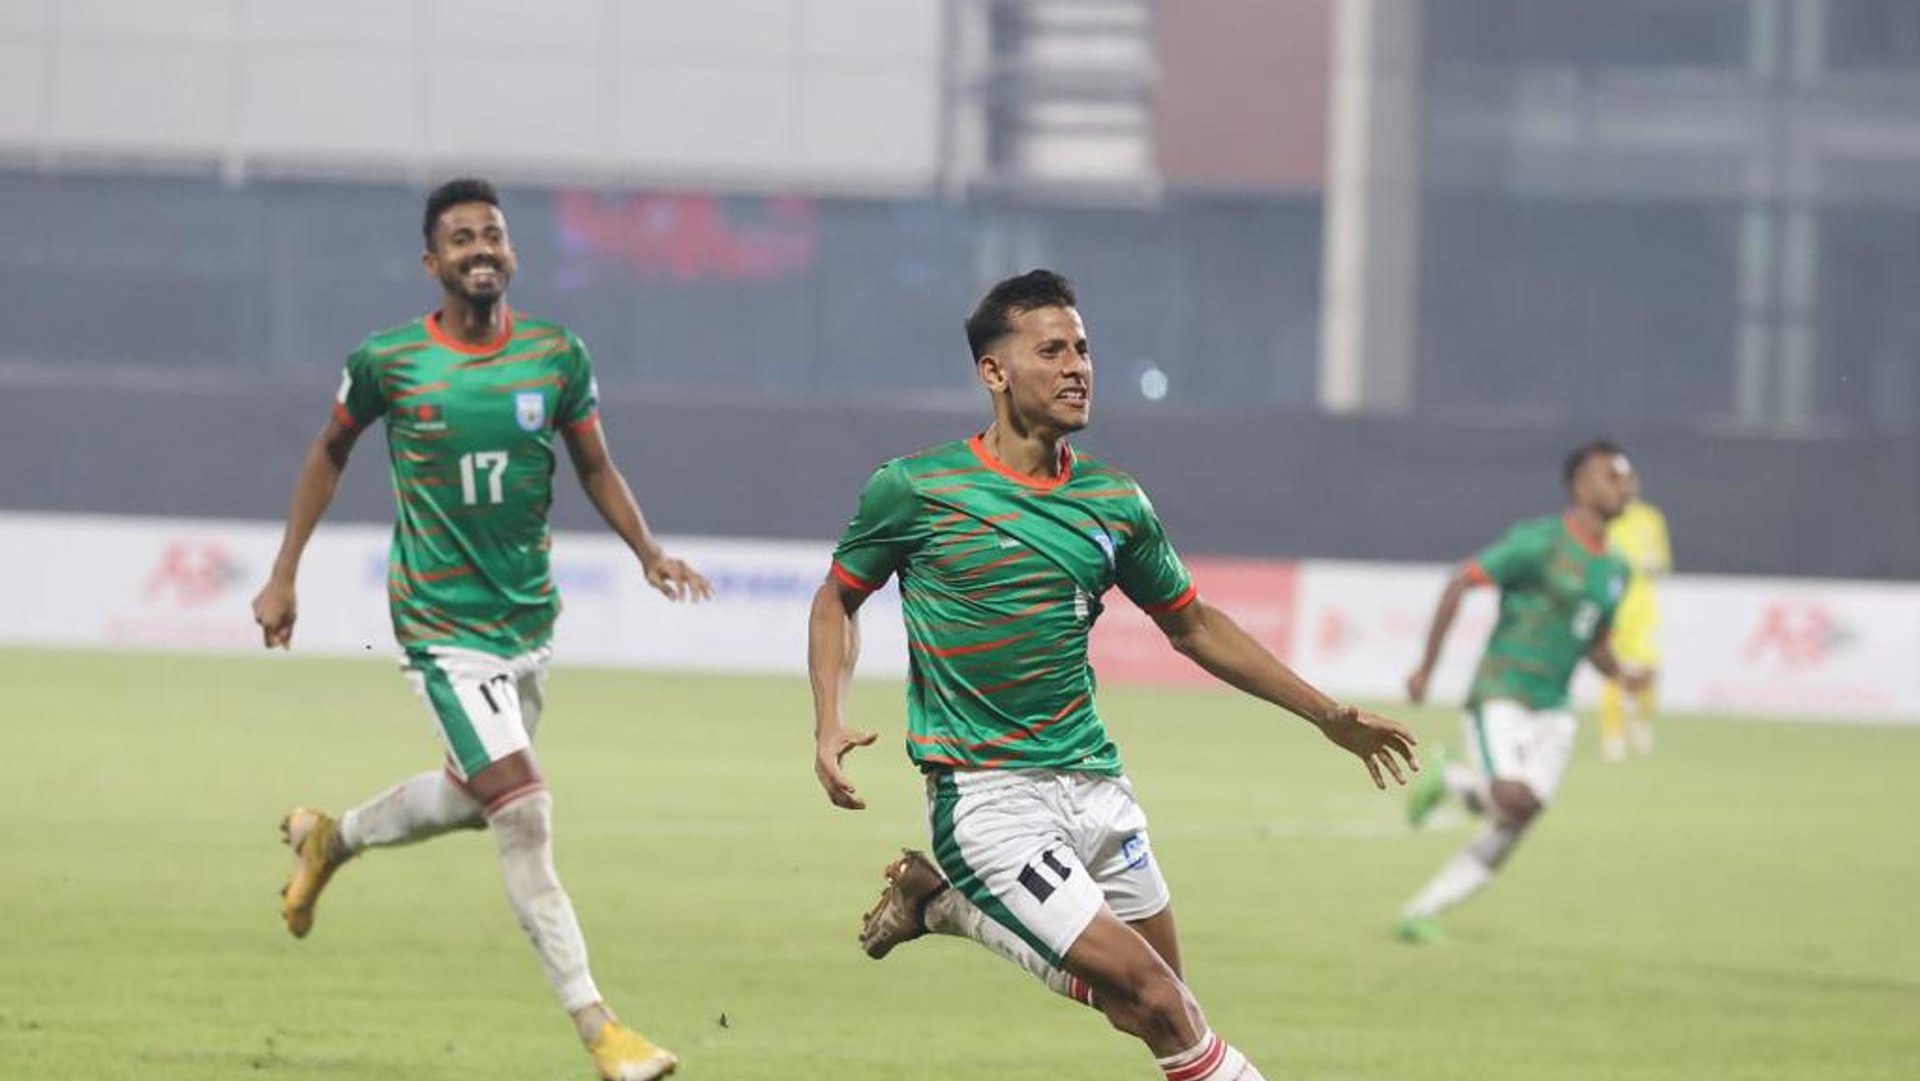 A photo made available by the Bangladesh Football Federation shows Bangladesh players celebrating after their 2-1 victory over the Maldives in the second leg of the pre-qualifying match in Dhaka, Bangladesh. EFE/Bangladesh Football Federation HANDOUT